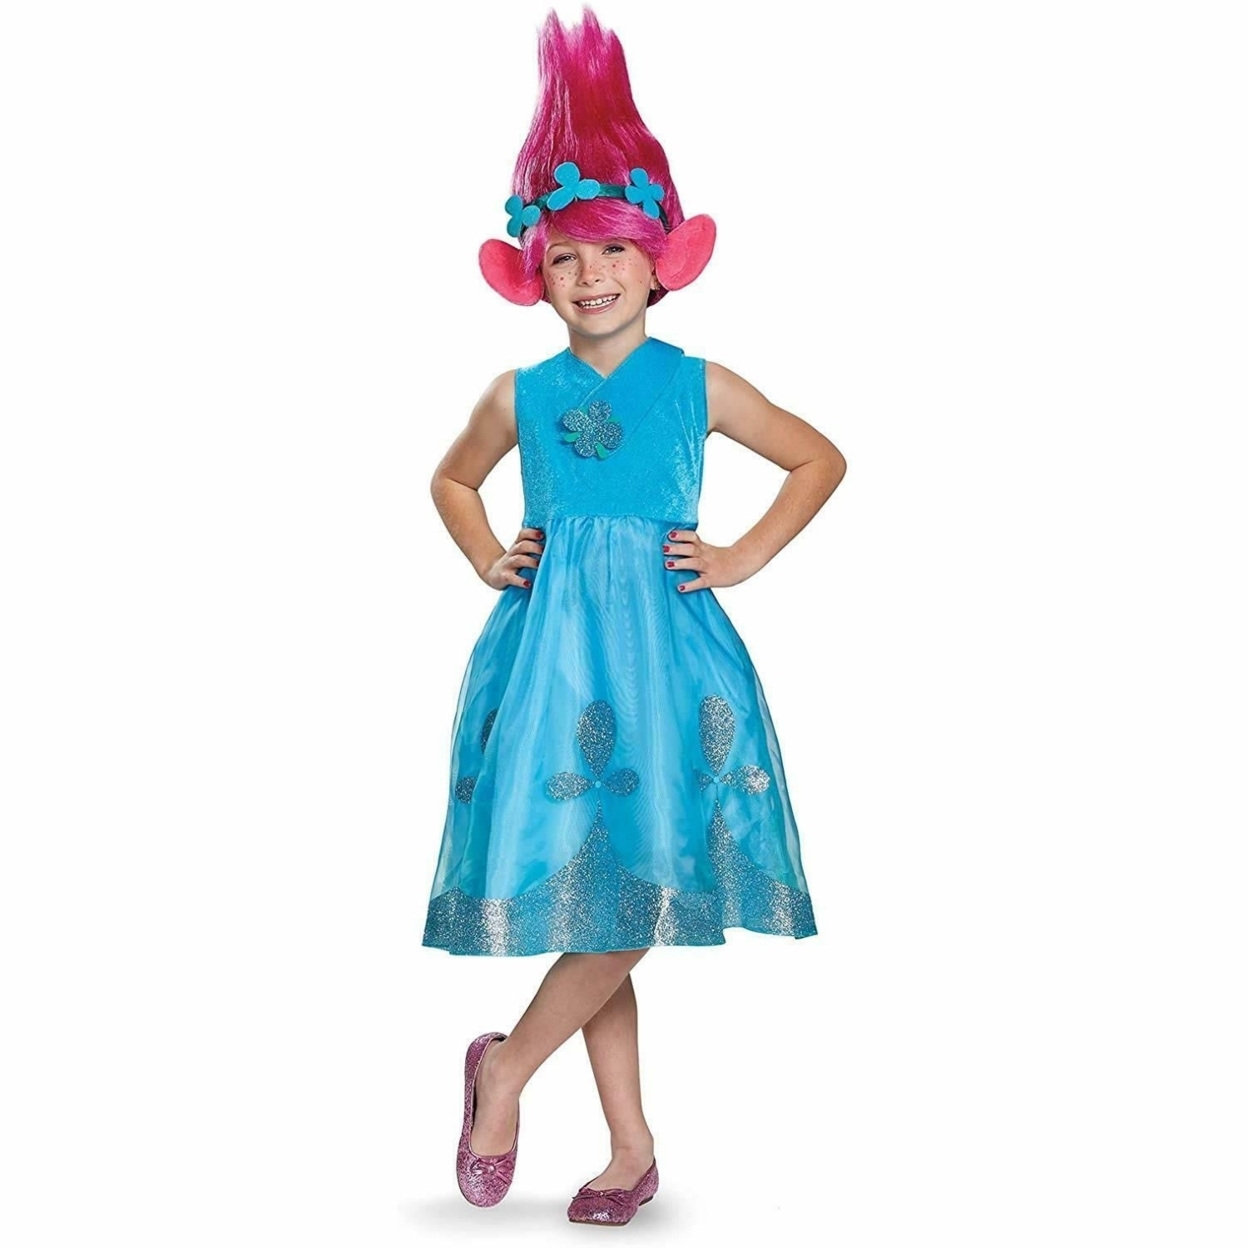 Trolls Poppy Deluxe W/Wig Size M 7/8 Girls Licensed Costume Disguise